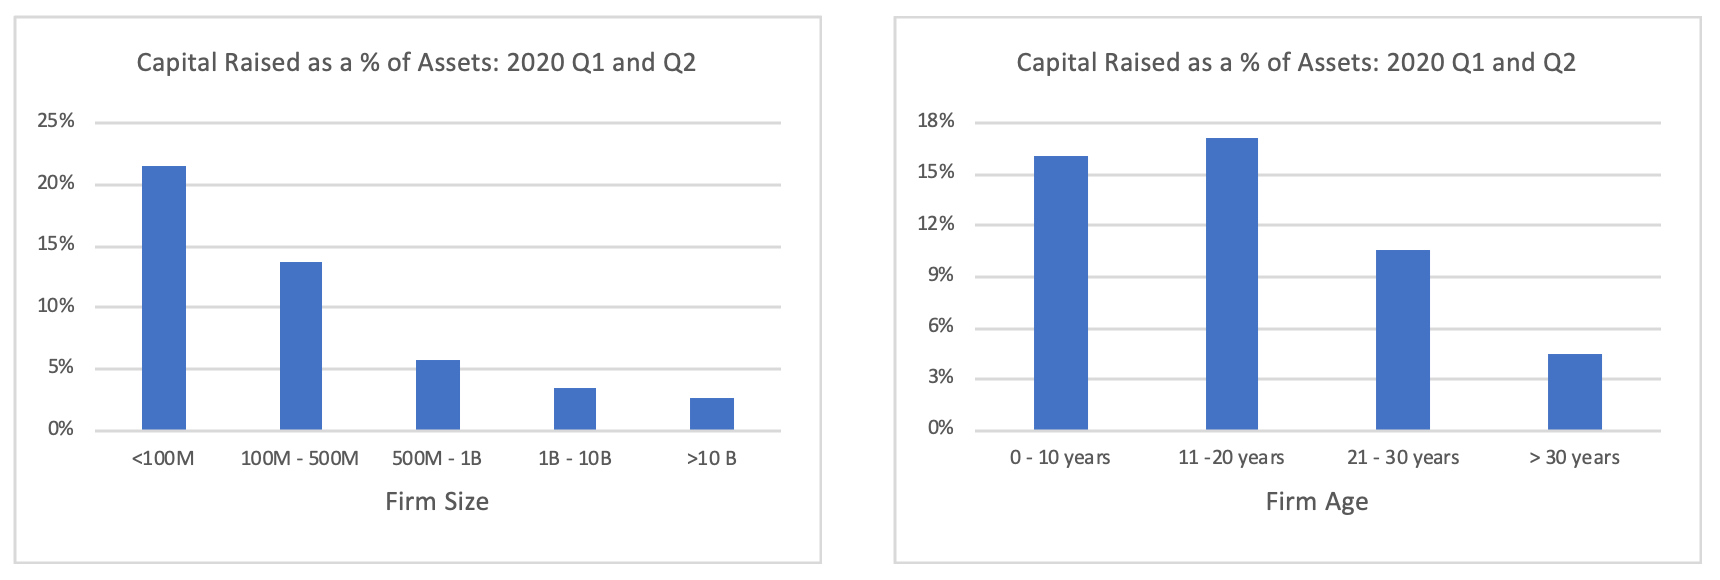 Capital raised as a percent of assets comparing firm size and age